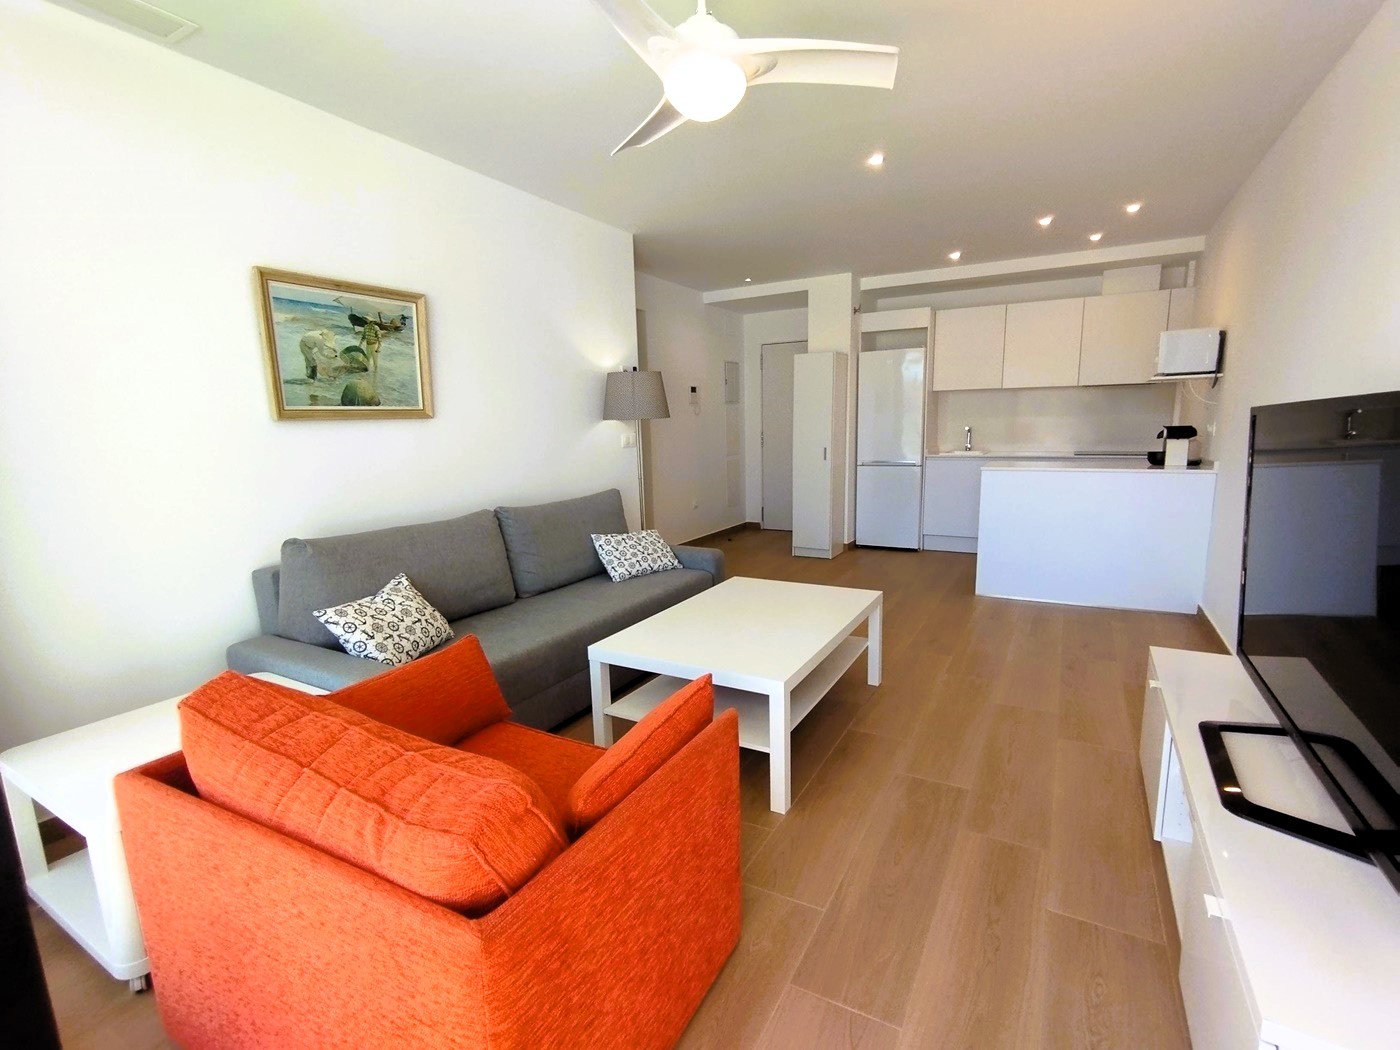 Ground Floor for sale on the first line in Denia